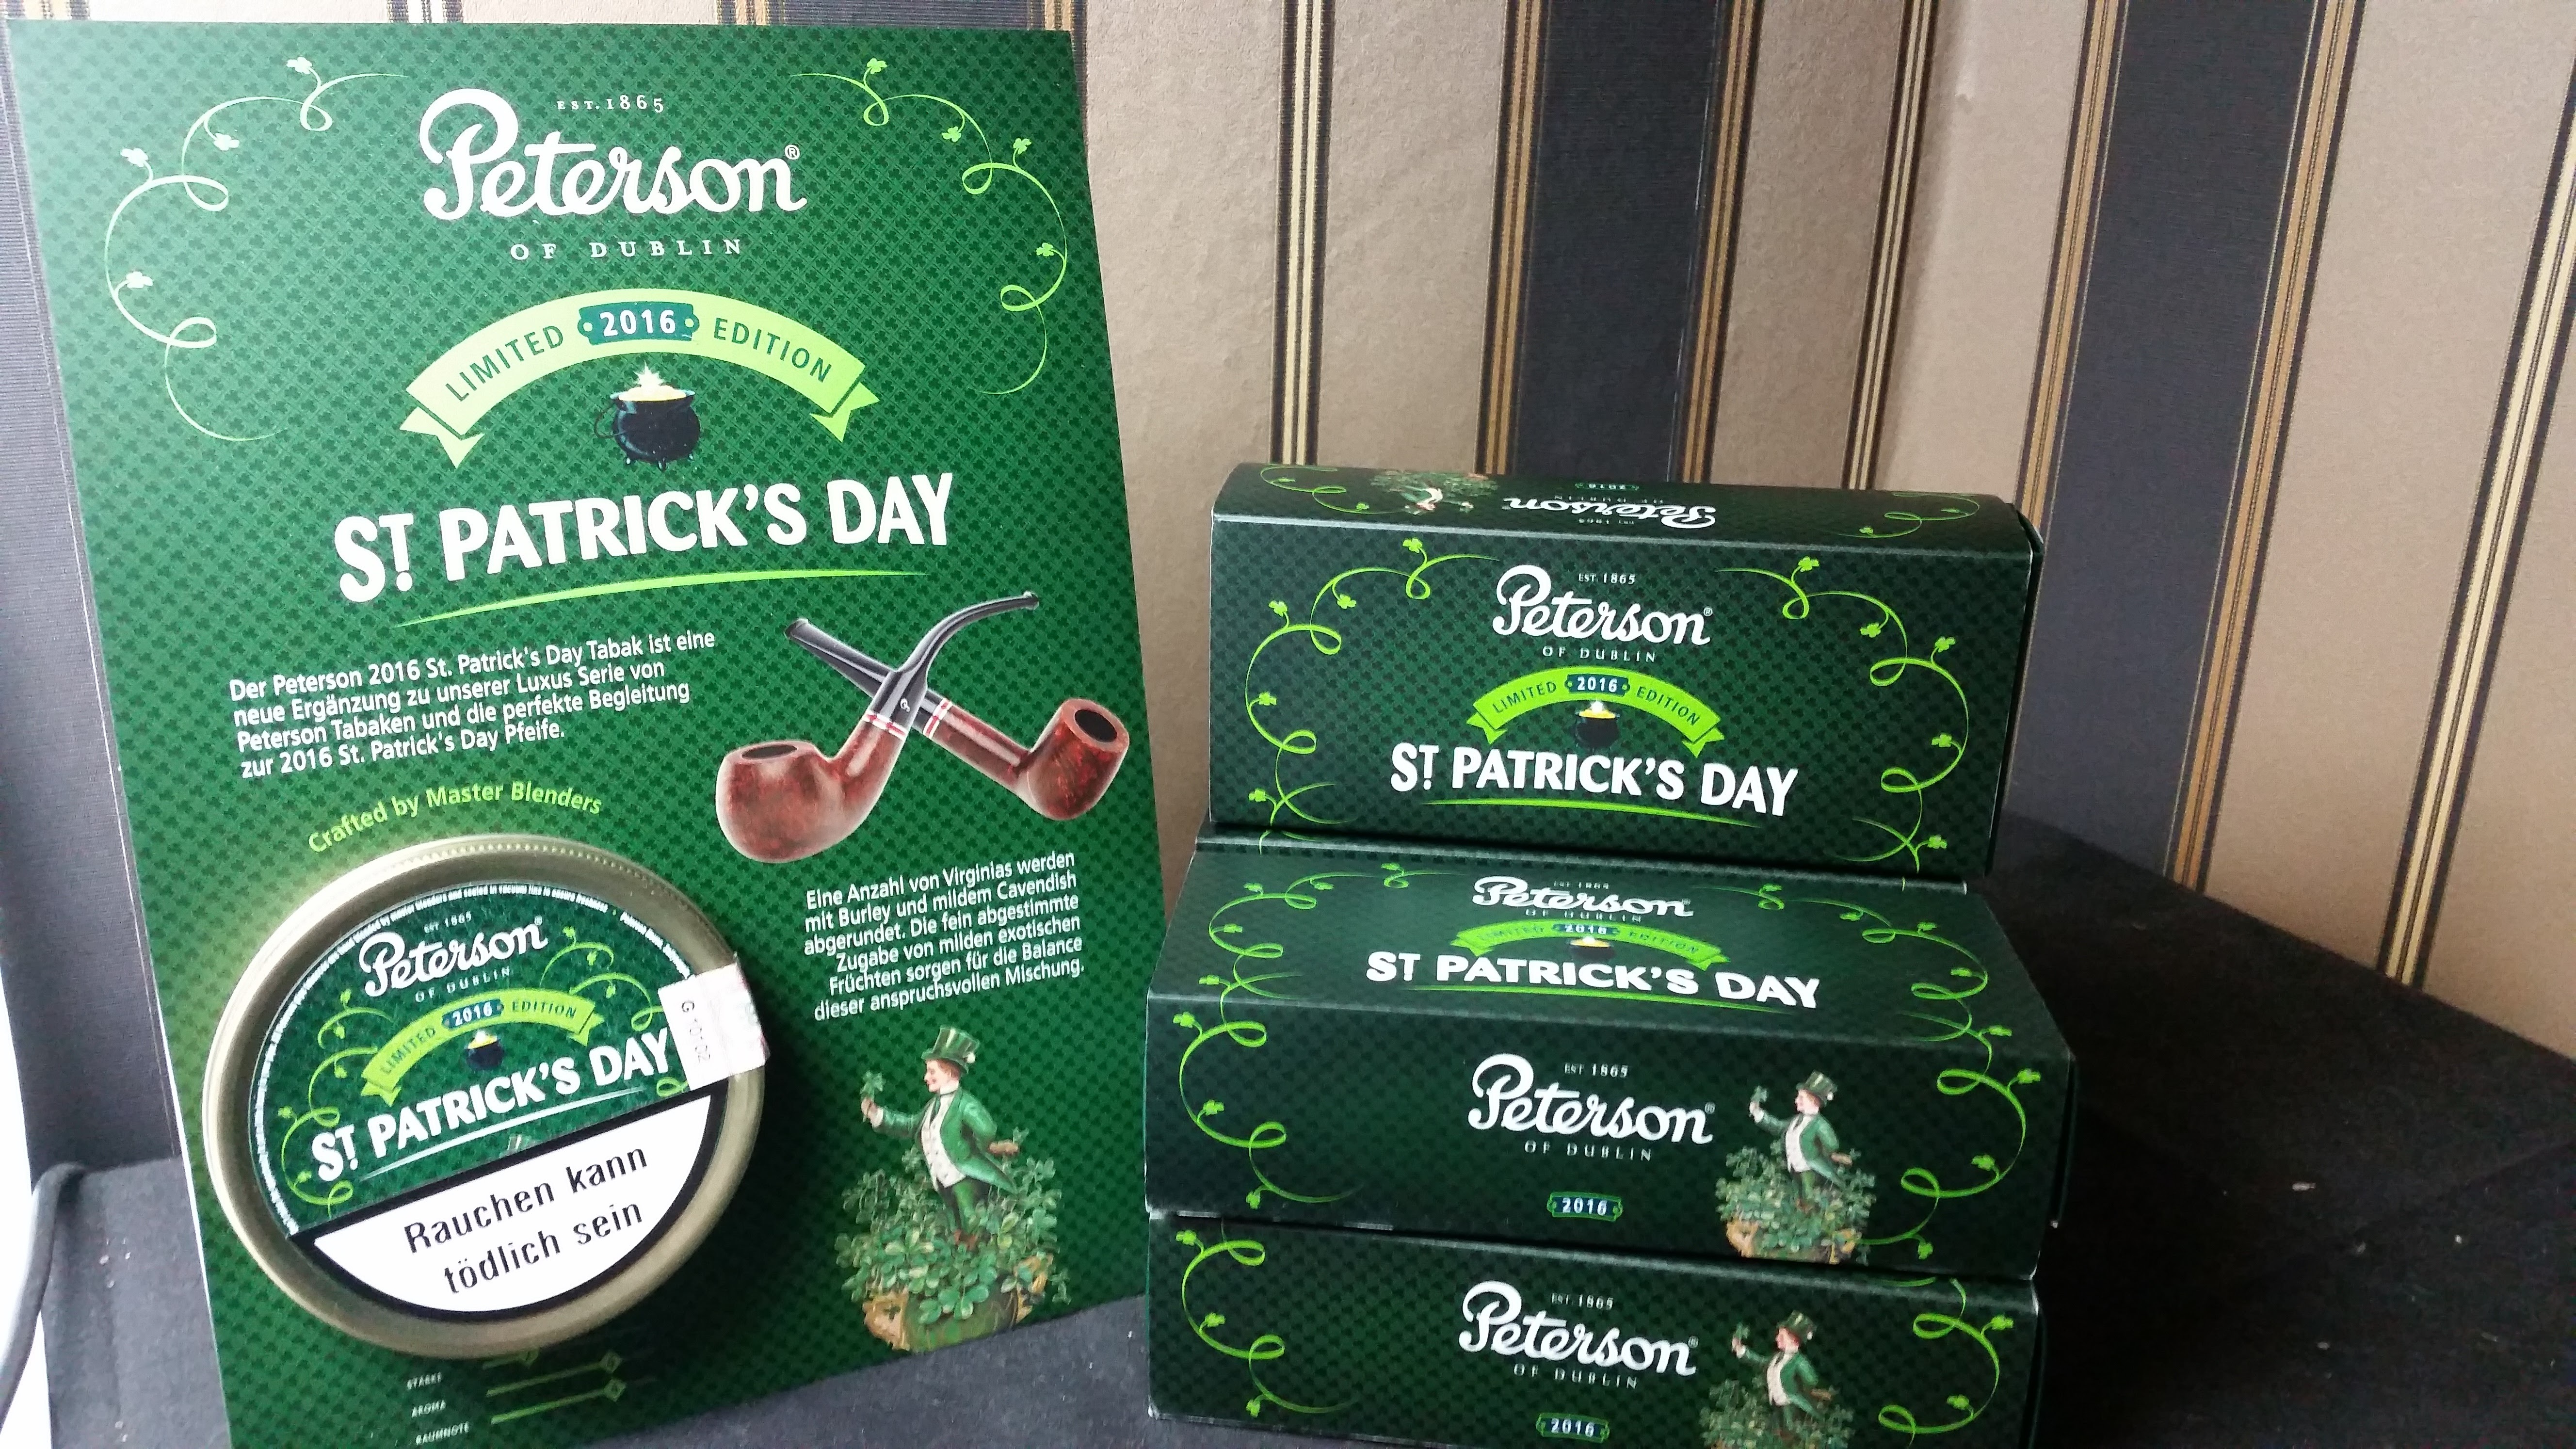 Peterson St. Patrick's Day 2016